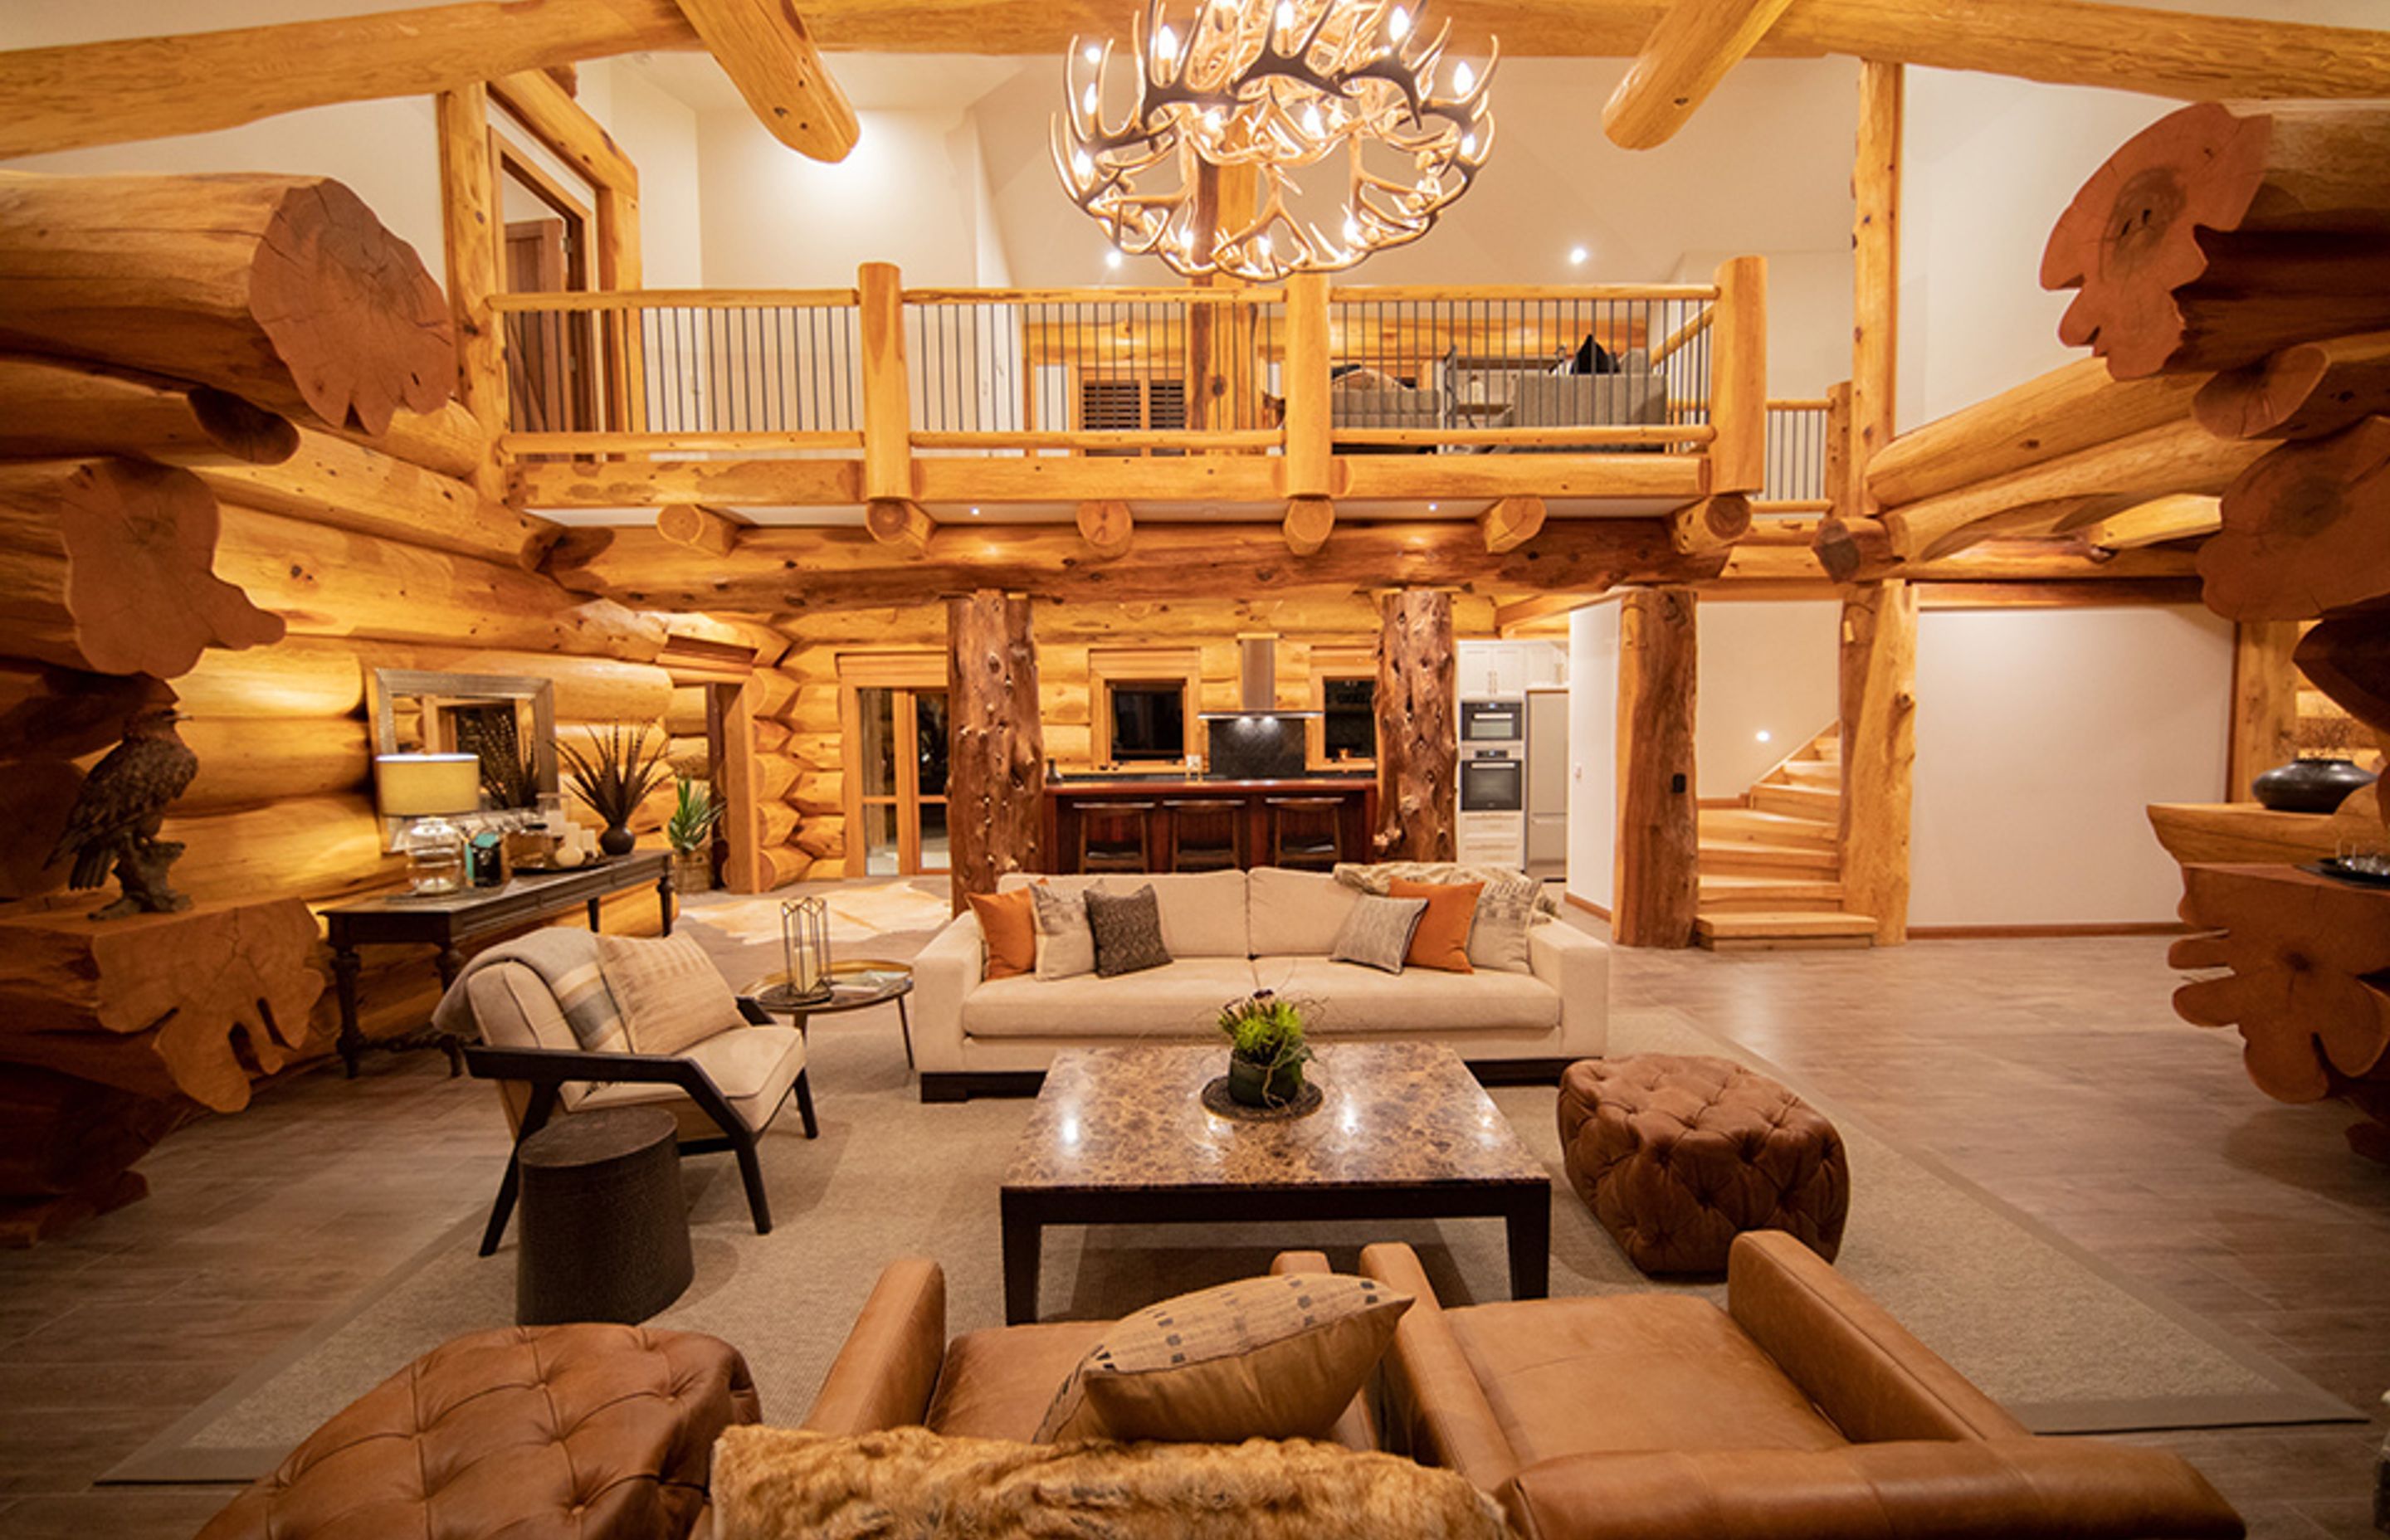 Located close to some of Central Otago’s best ski fields and lakes, the home embodies the idea of a hunting lodge – ideal for family and friends to gather after a day of adventures.